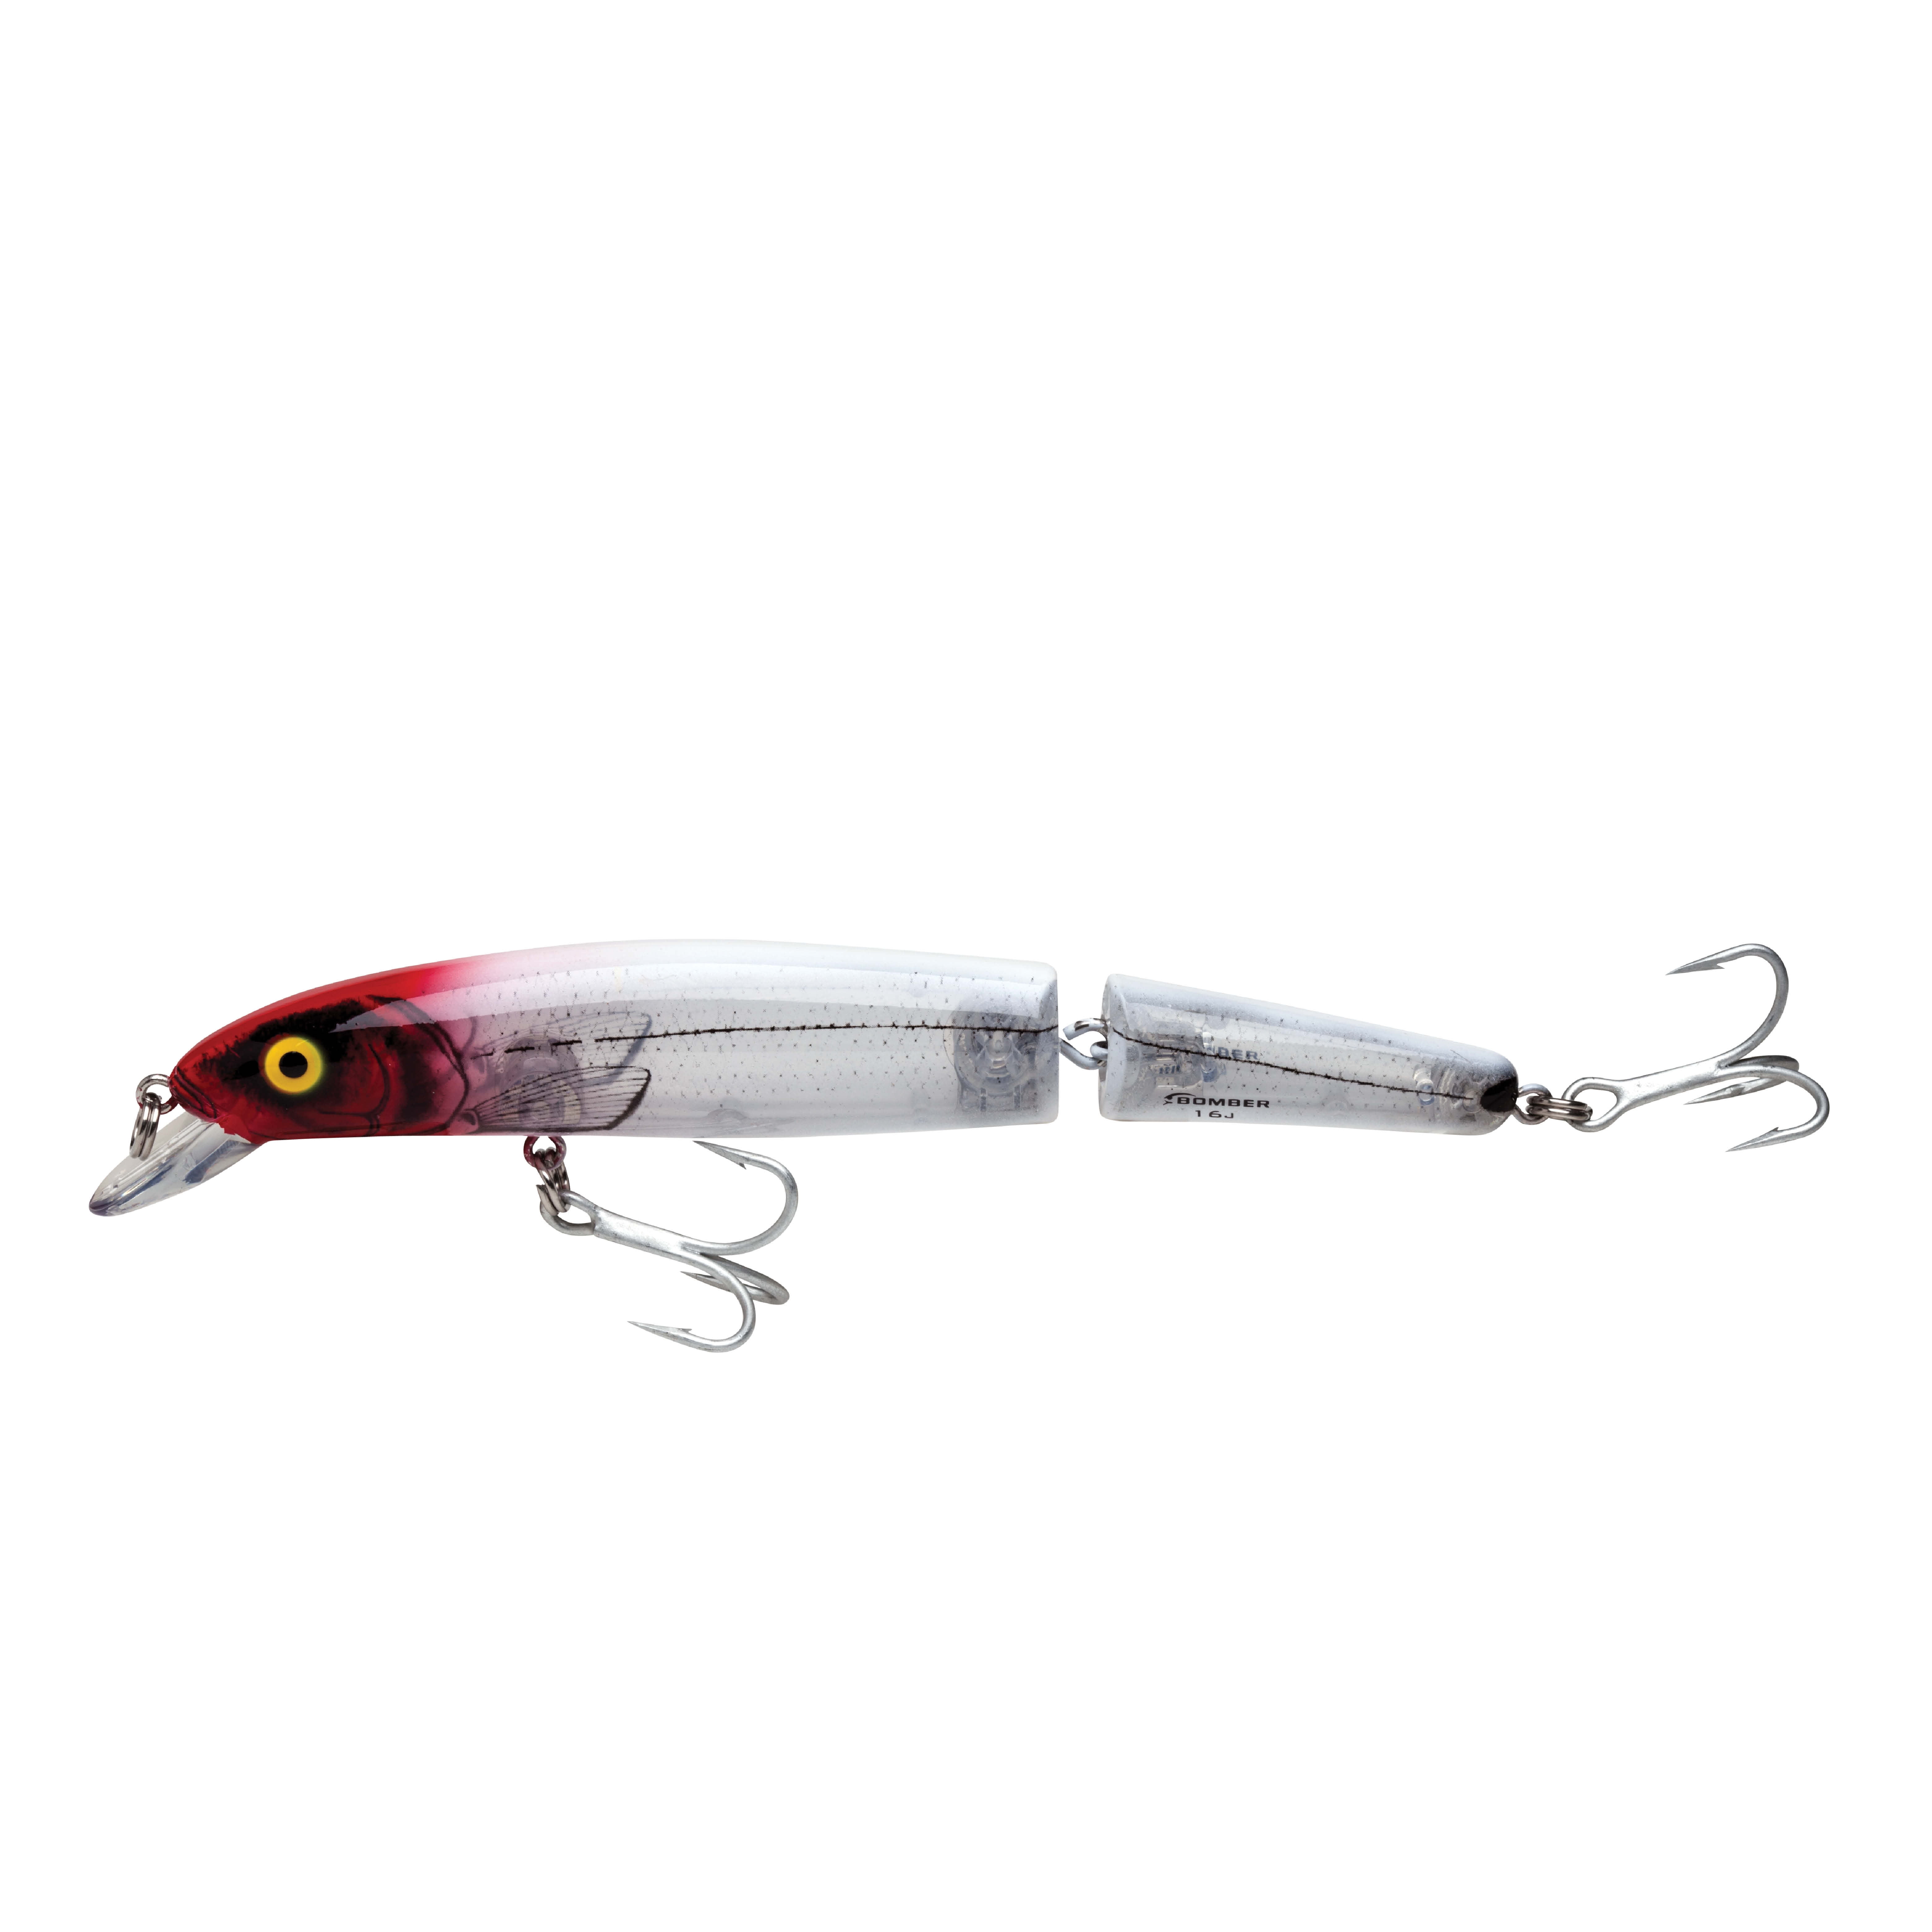 Bomber W6 Wind-Cheater BSWW6 6 Saltwater grade fishing lure new